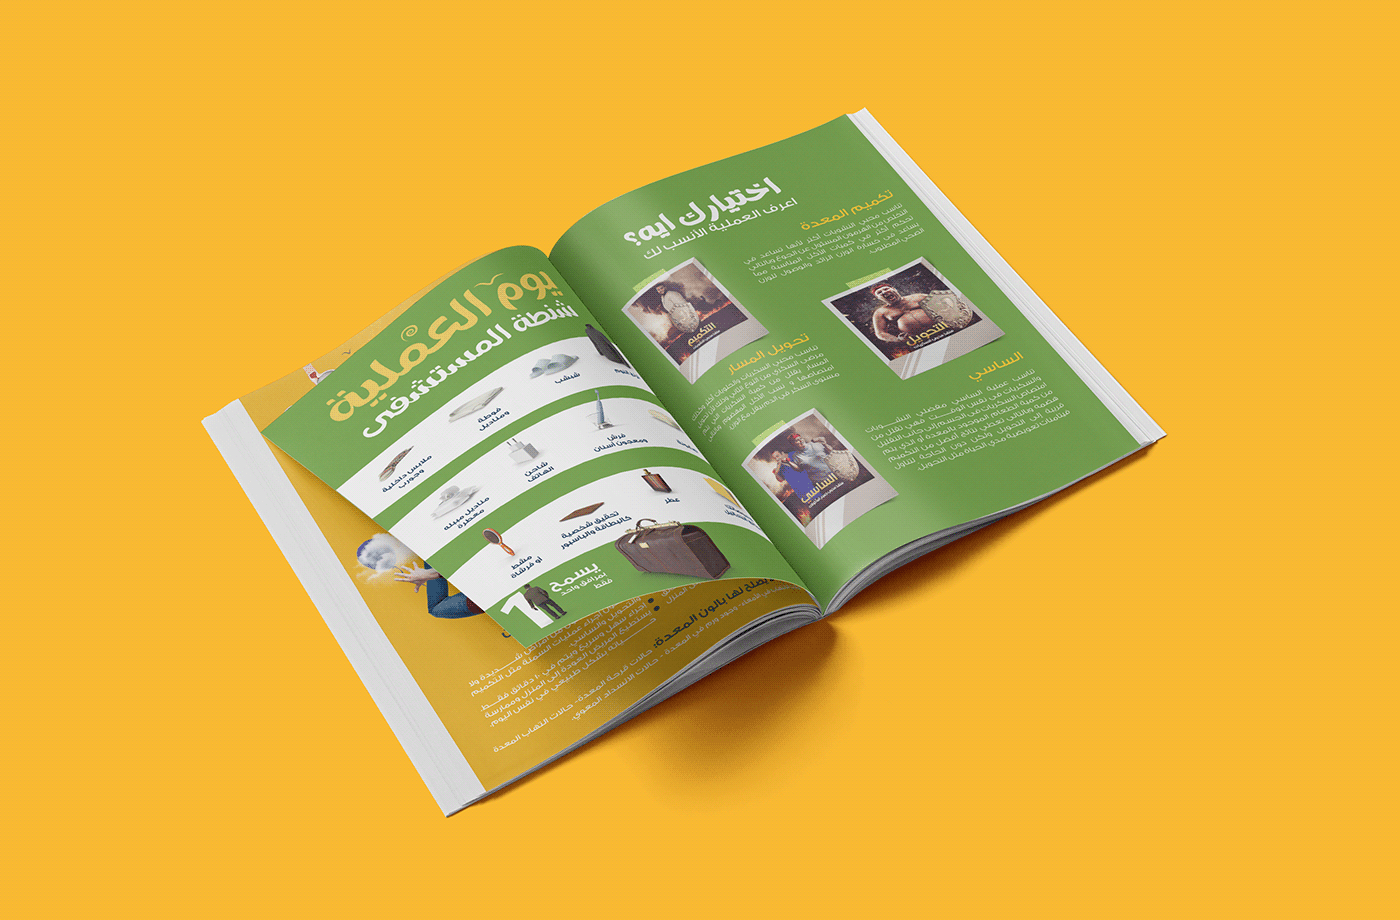 Advertising  magazine print creative e-book ebook Layout offset paper professional